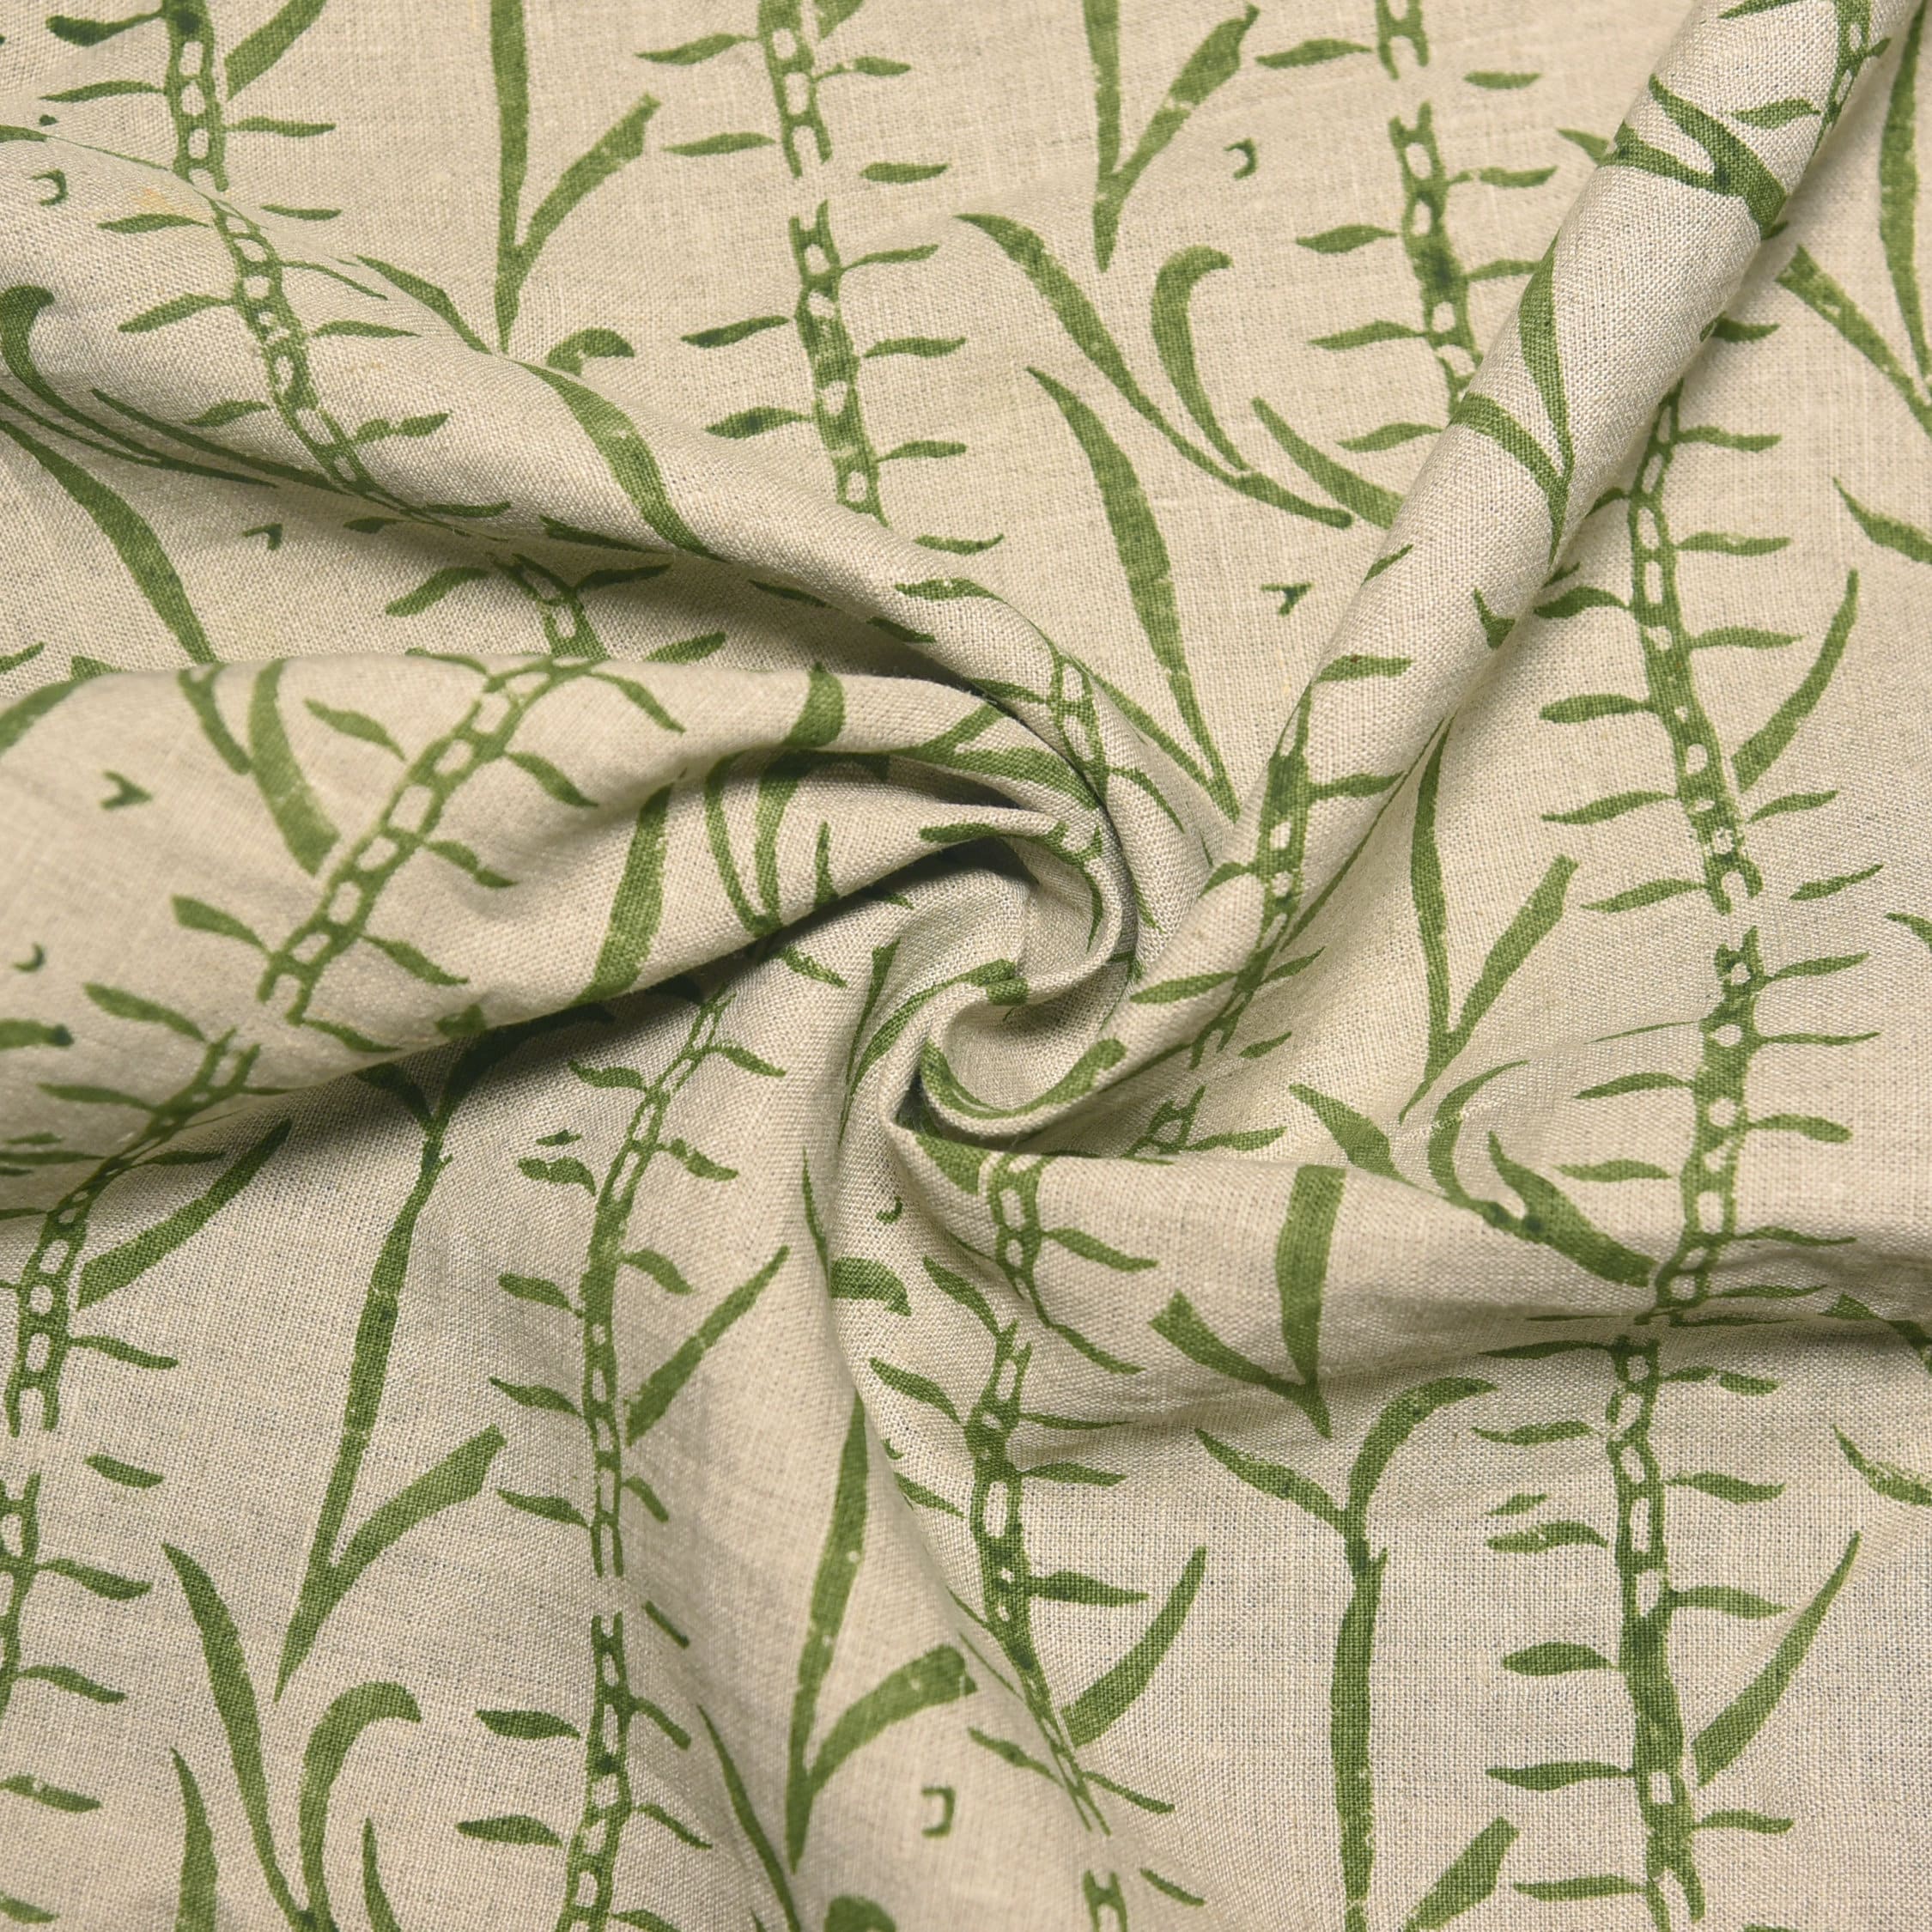 Block Print Linen Fabric, Sugarcane Natural Linen Block Printed Fabric Green Linen Fabric For Home Decor Upholestery Fabric By The Yard